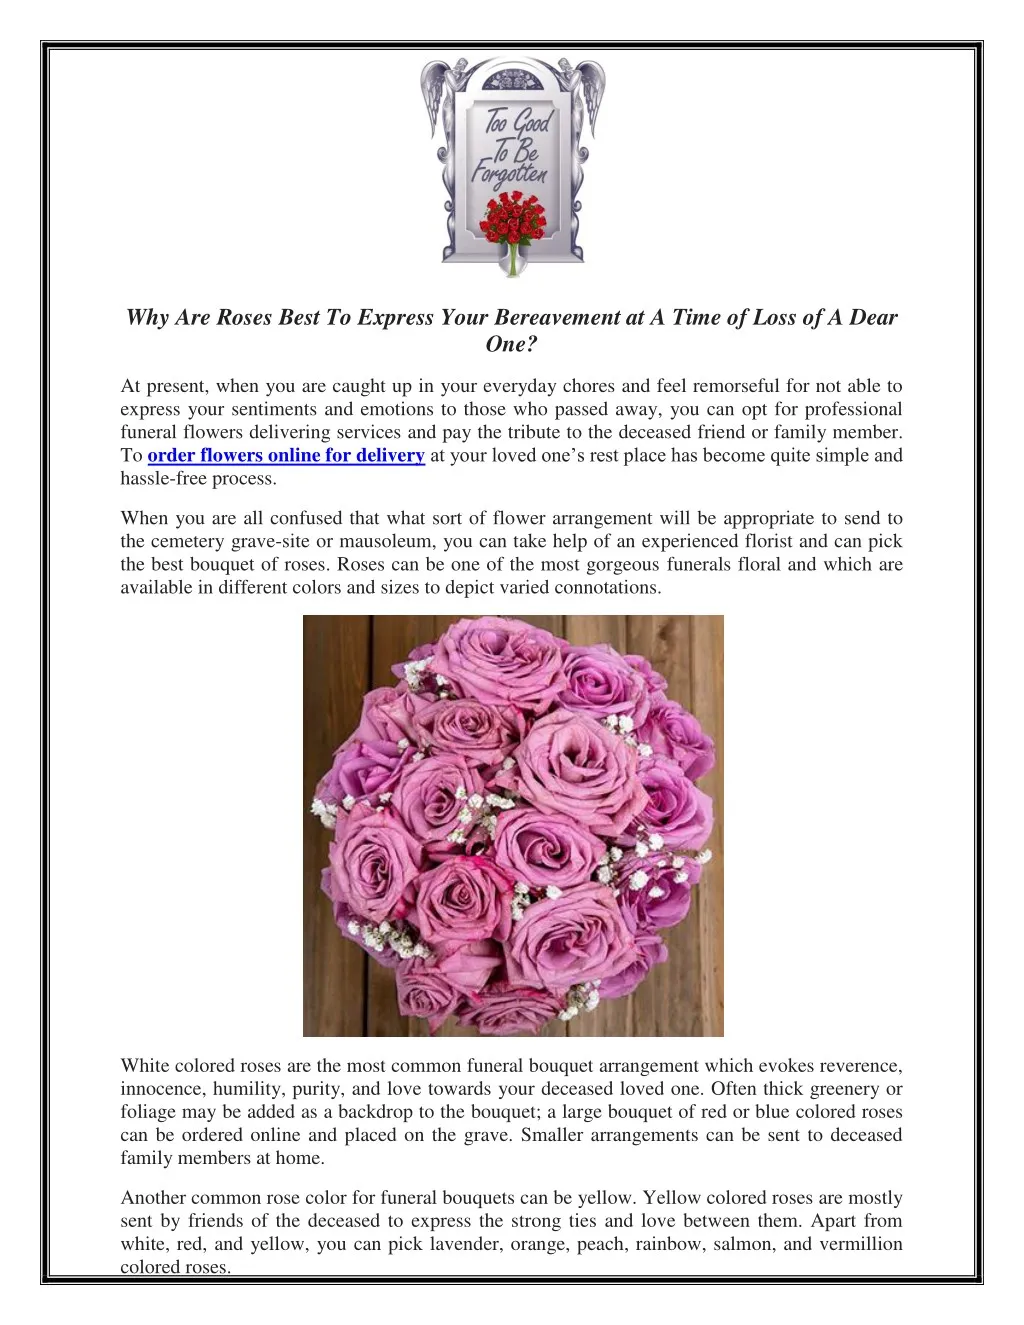 why are roses best to express your bereavement